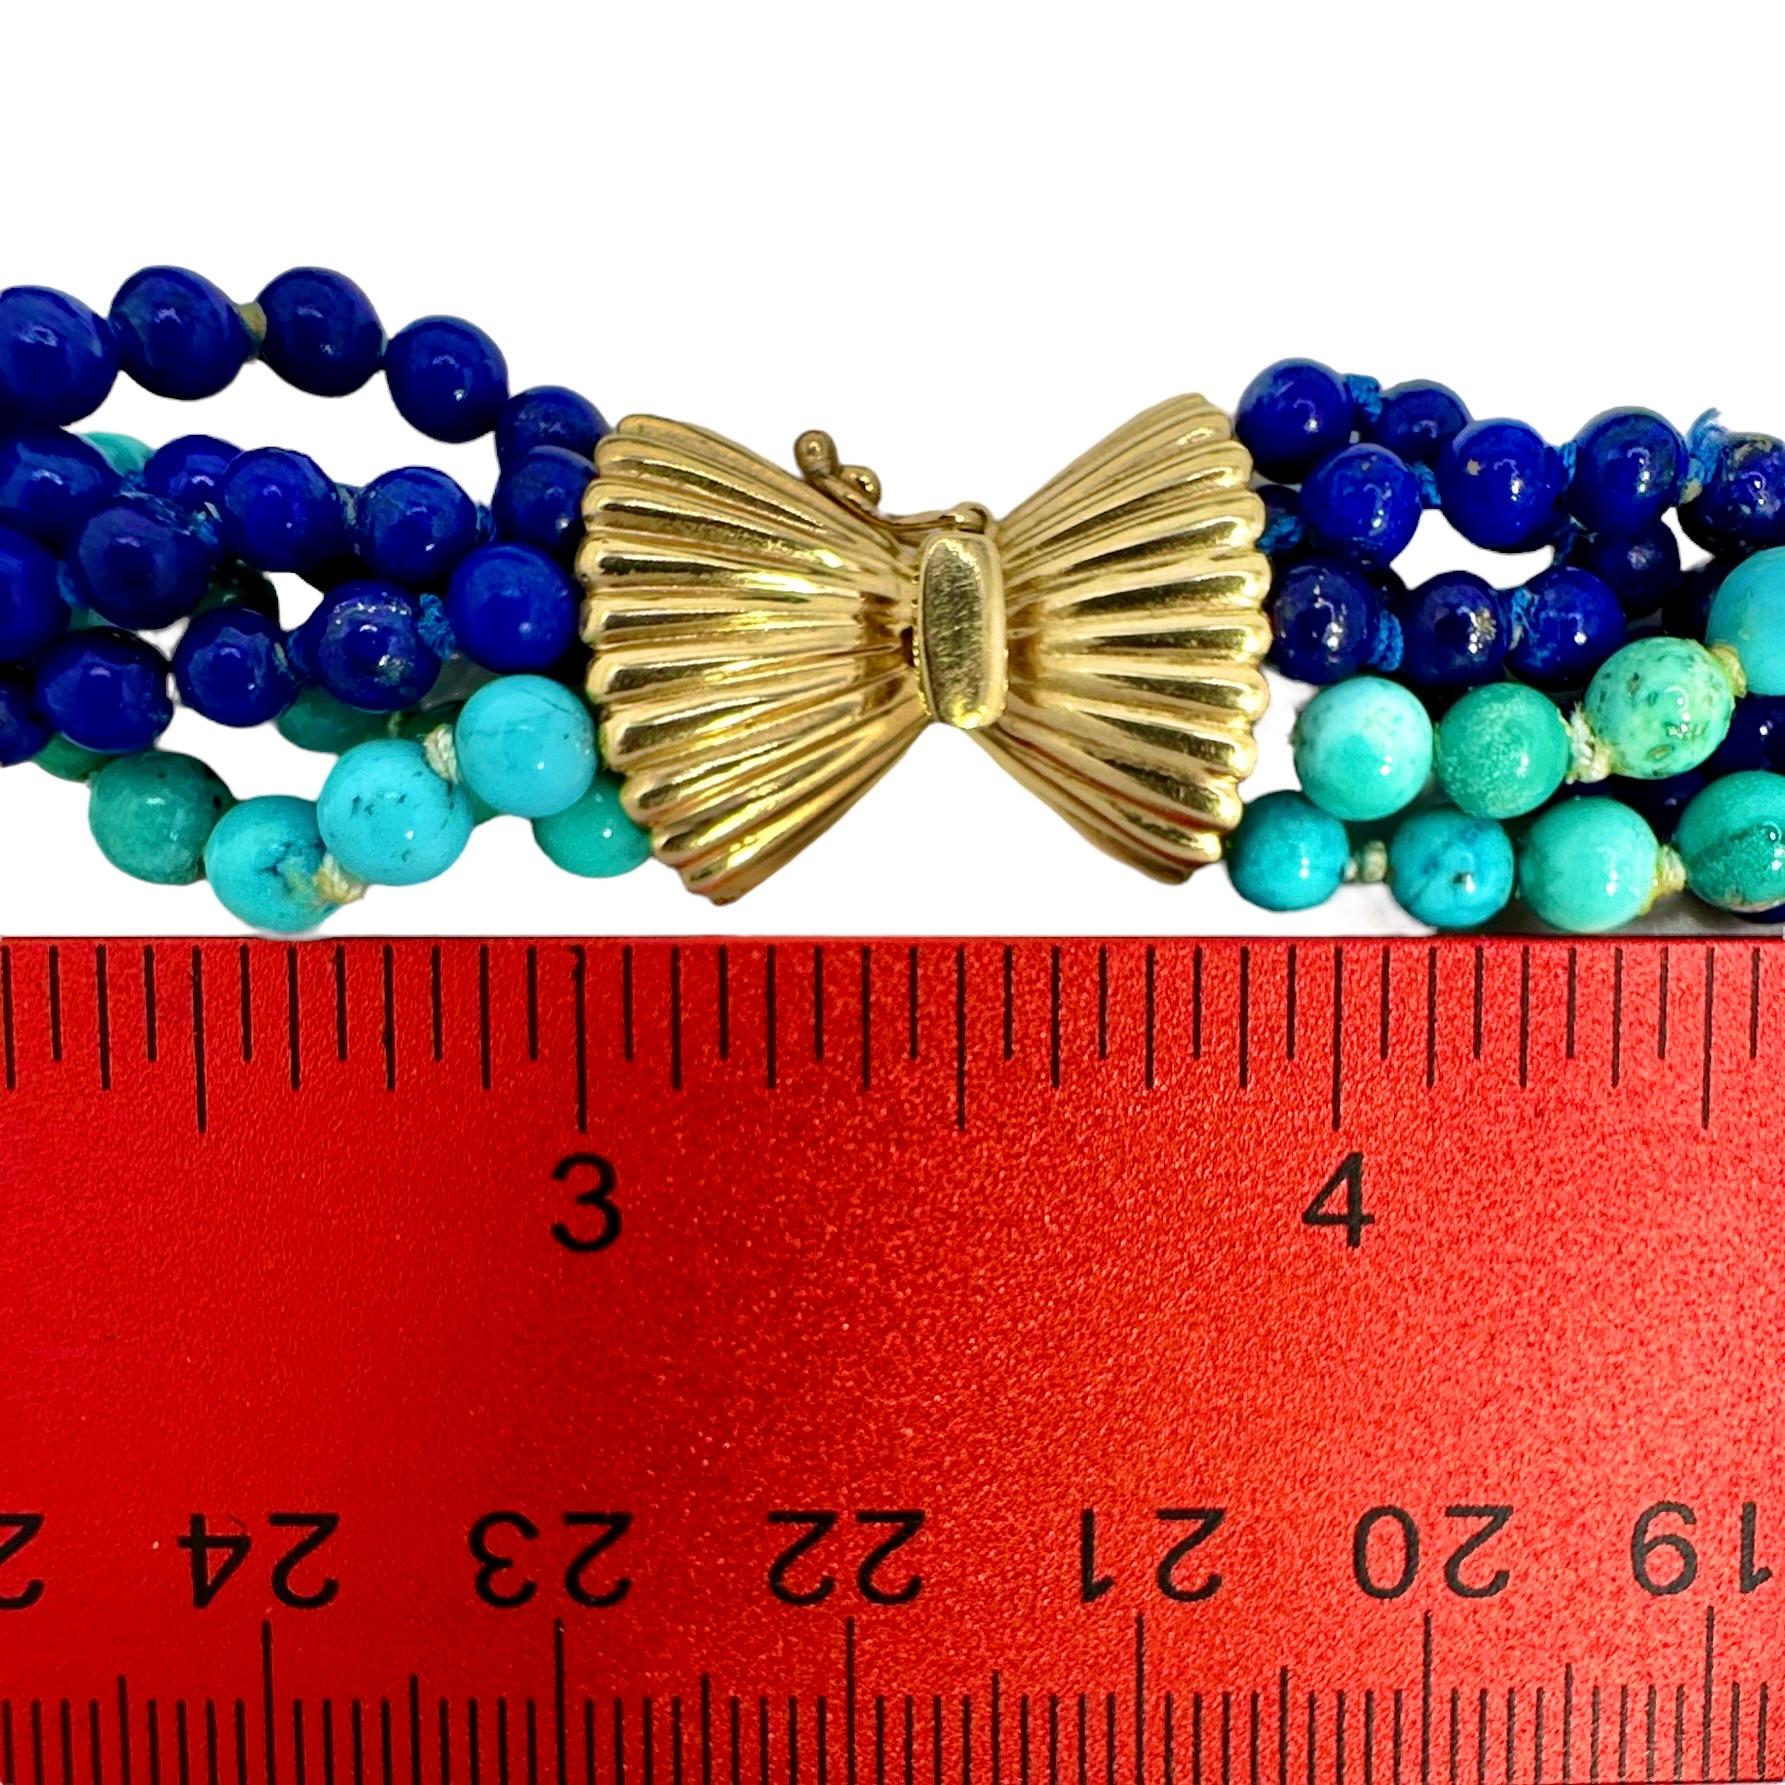 Classic Mid-20th Century Torsade Choker with Lapis, Turquoise and Gold Beads For Sale 1